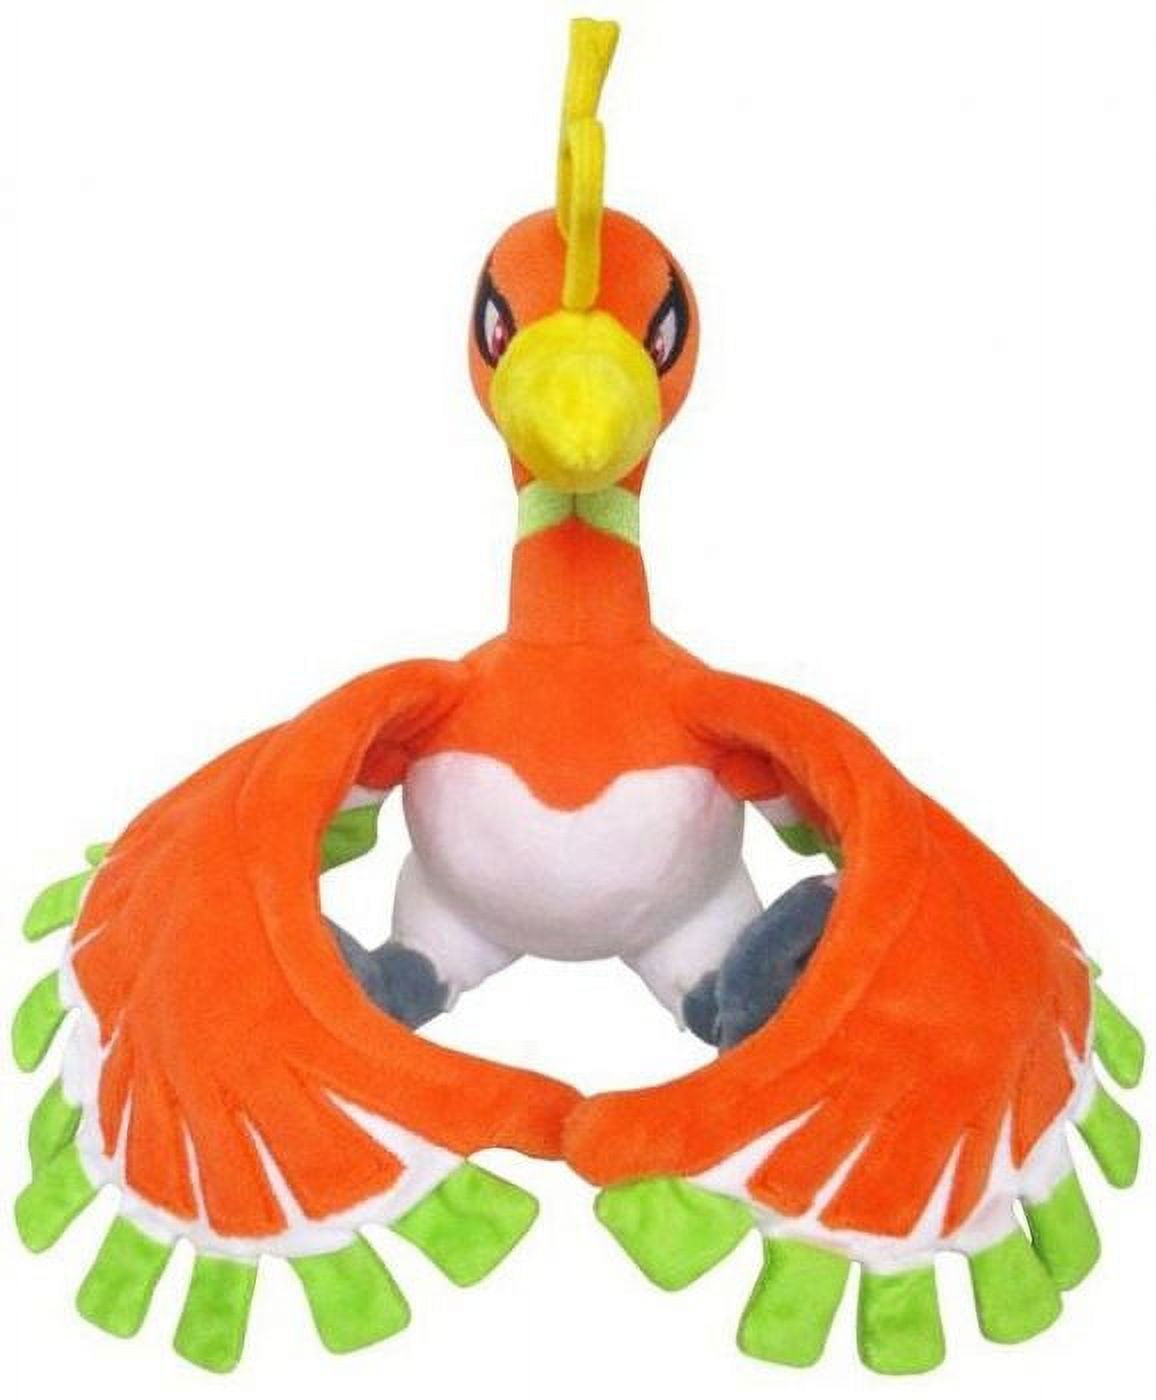 All You Need To Know About Ho-Oh